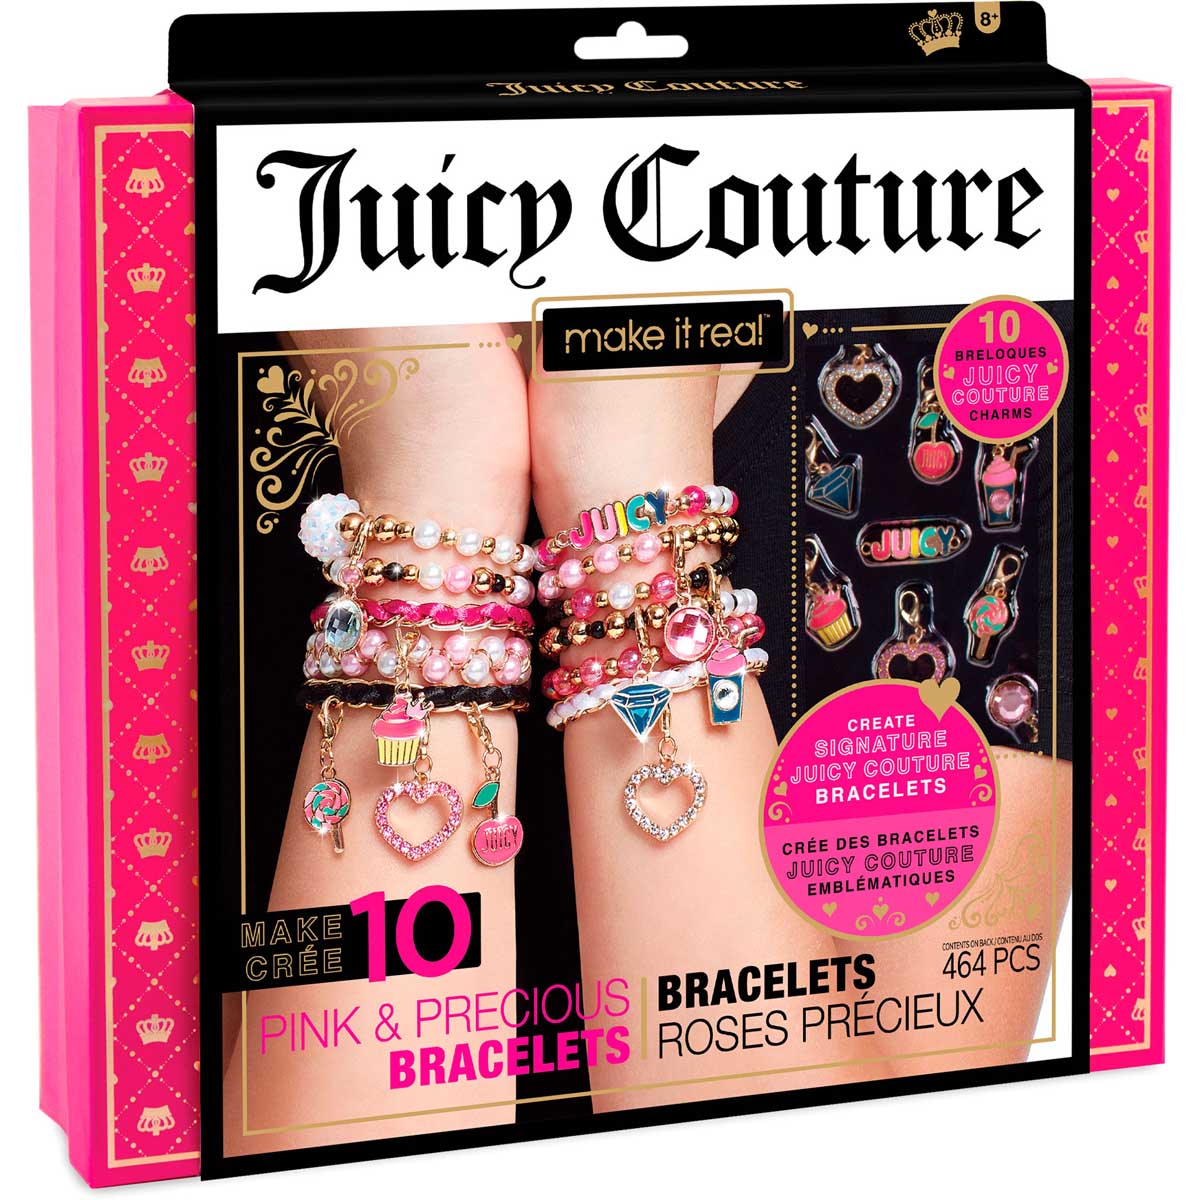 Juicy Couture Official Charm Bracelet Rainbow Charm Bracelet Trendy Bracelet  for Her Mother's Jewelry Gift Set Juicy Make up Bag LGBTQ Gift -   Denmark